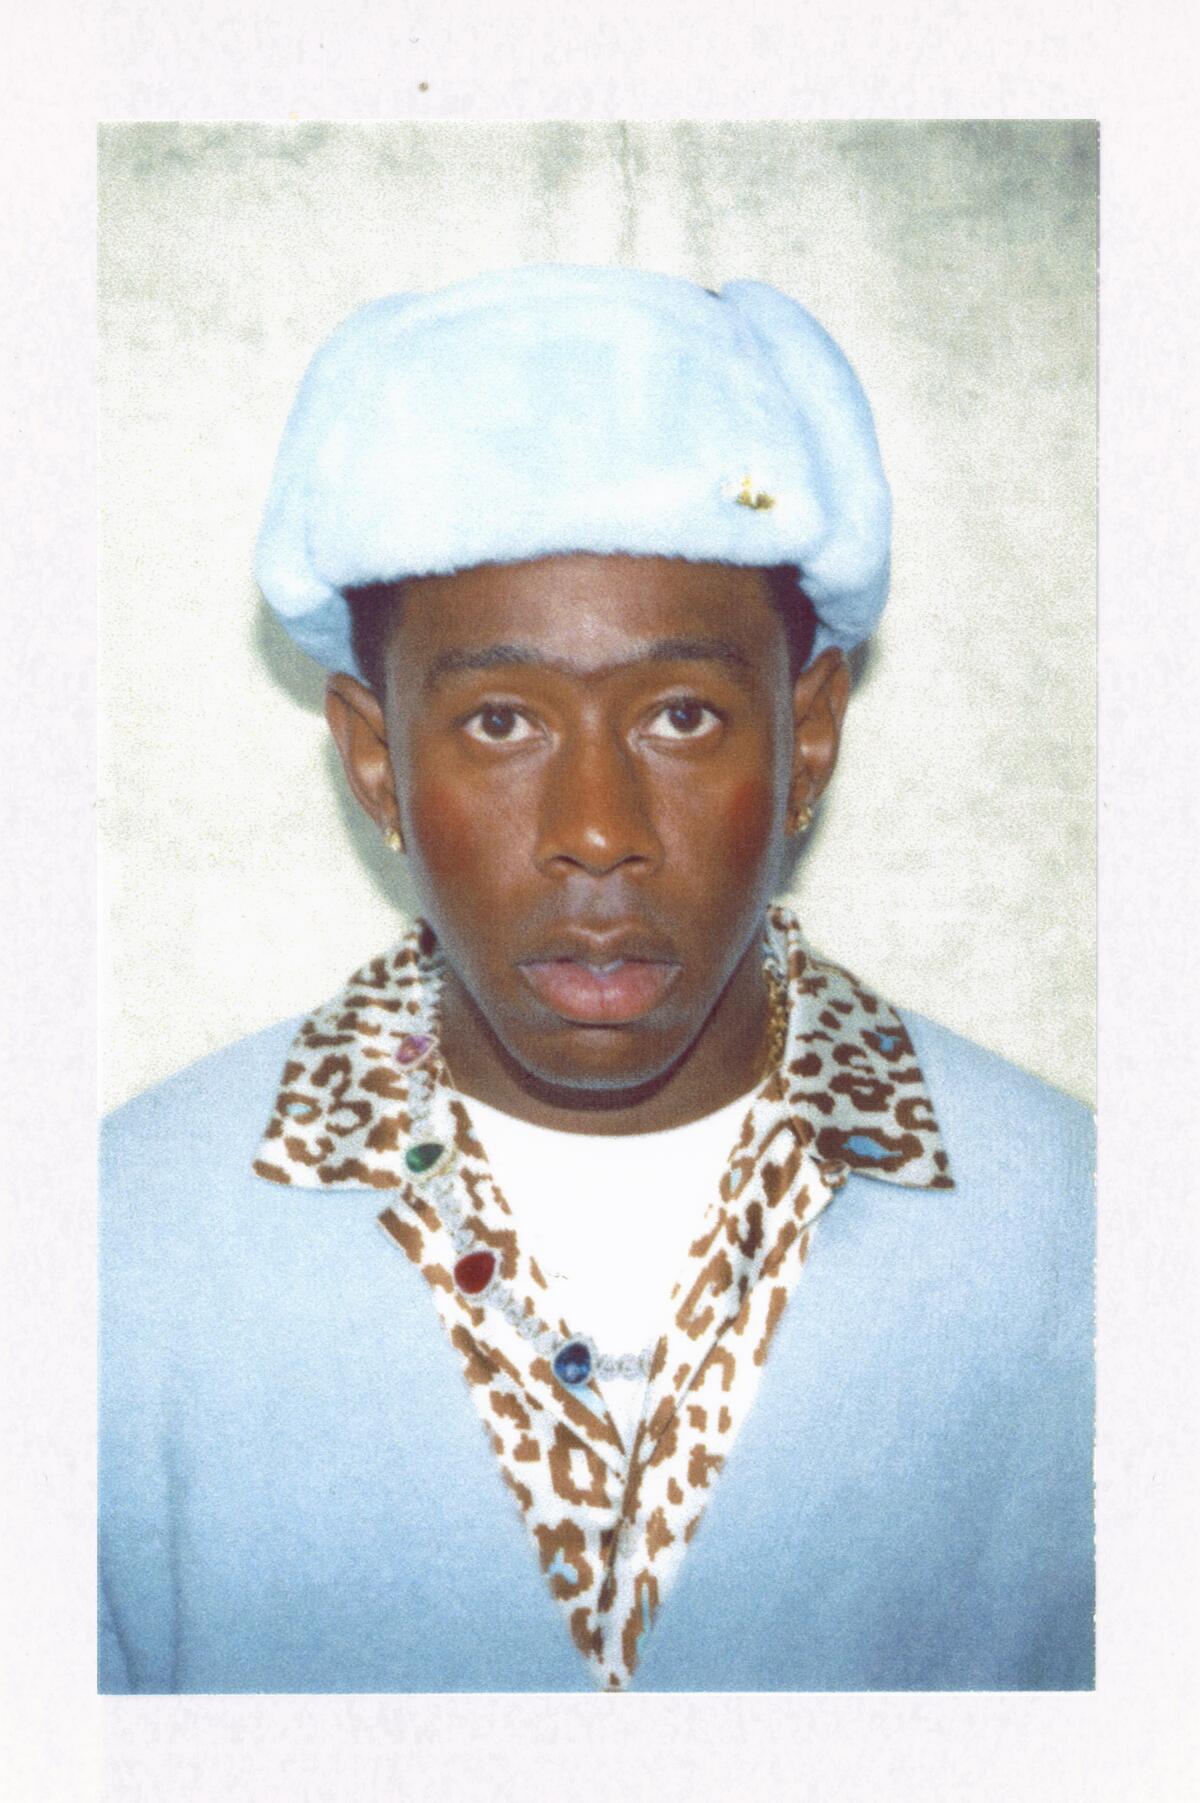 The Untold Truth Of Tyler, The Creator